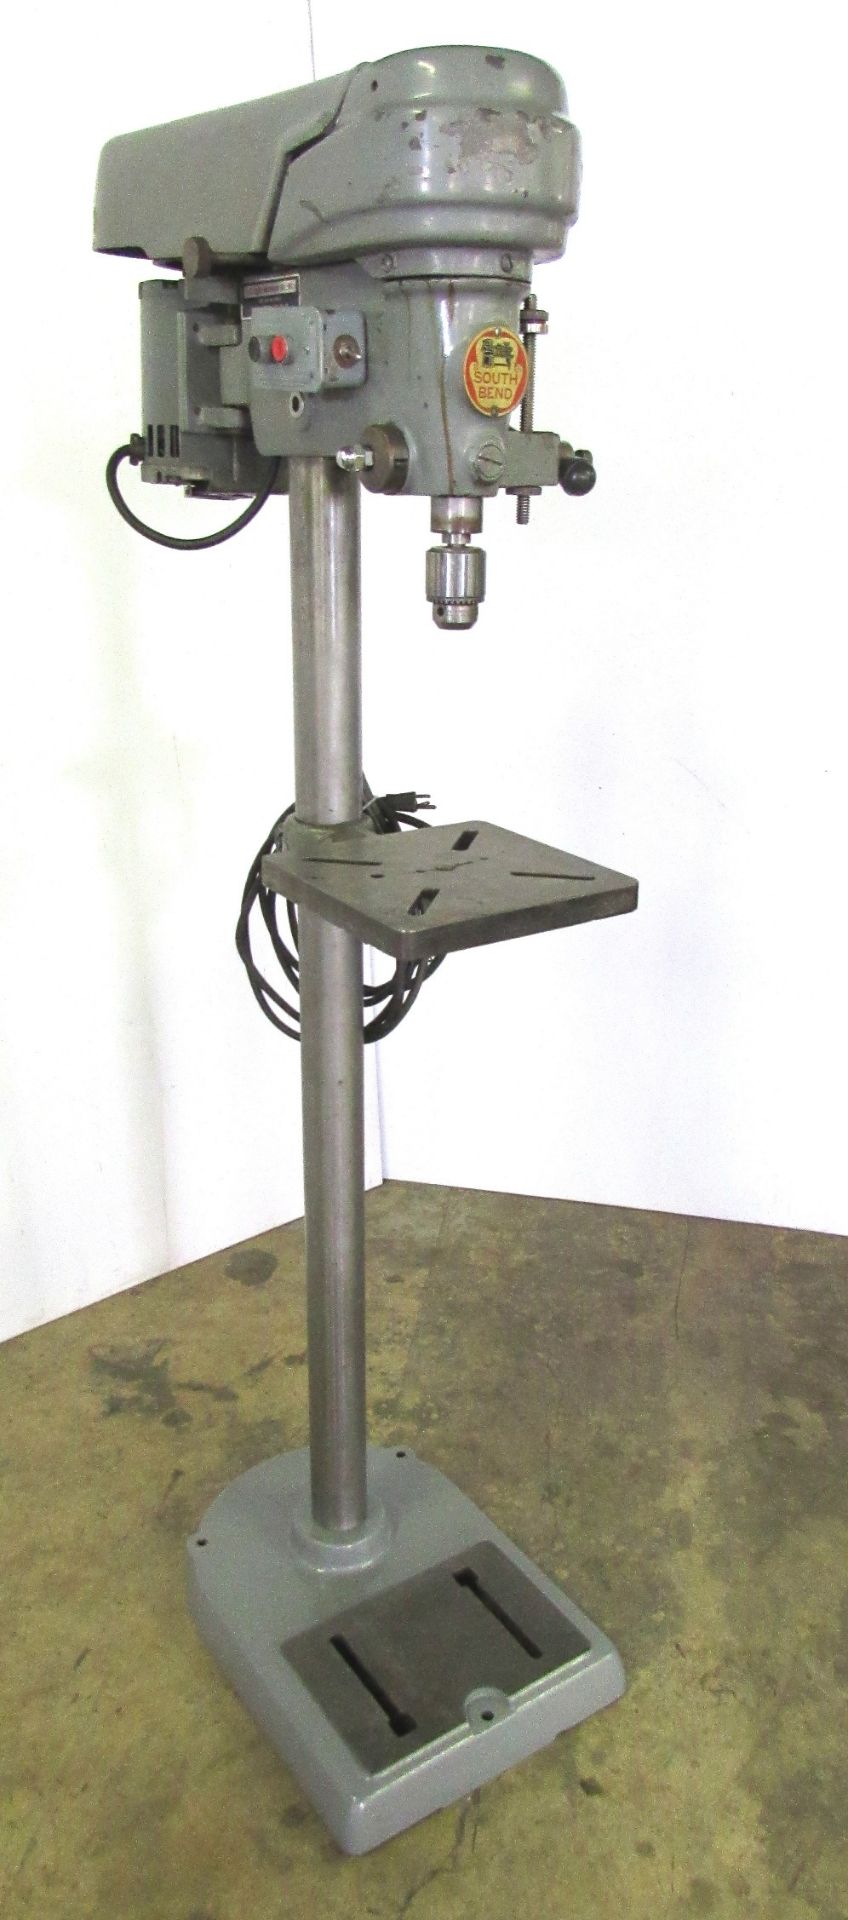 Southbend 14" Floor Type Drill Press - Image 2 of 2